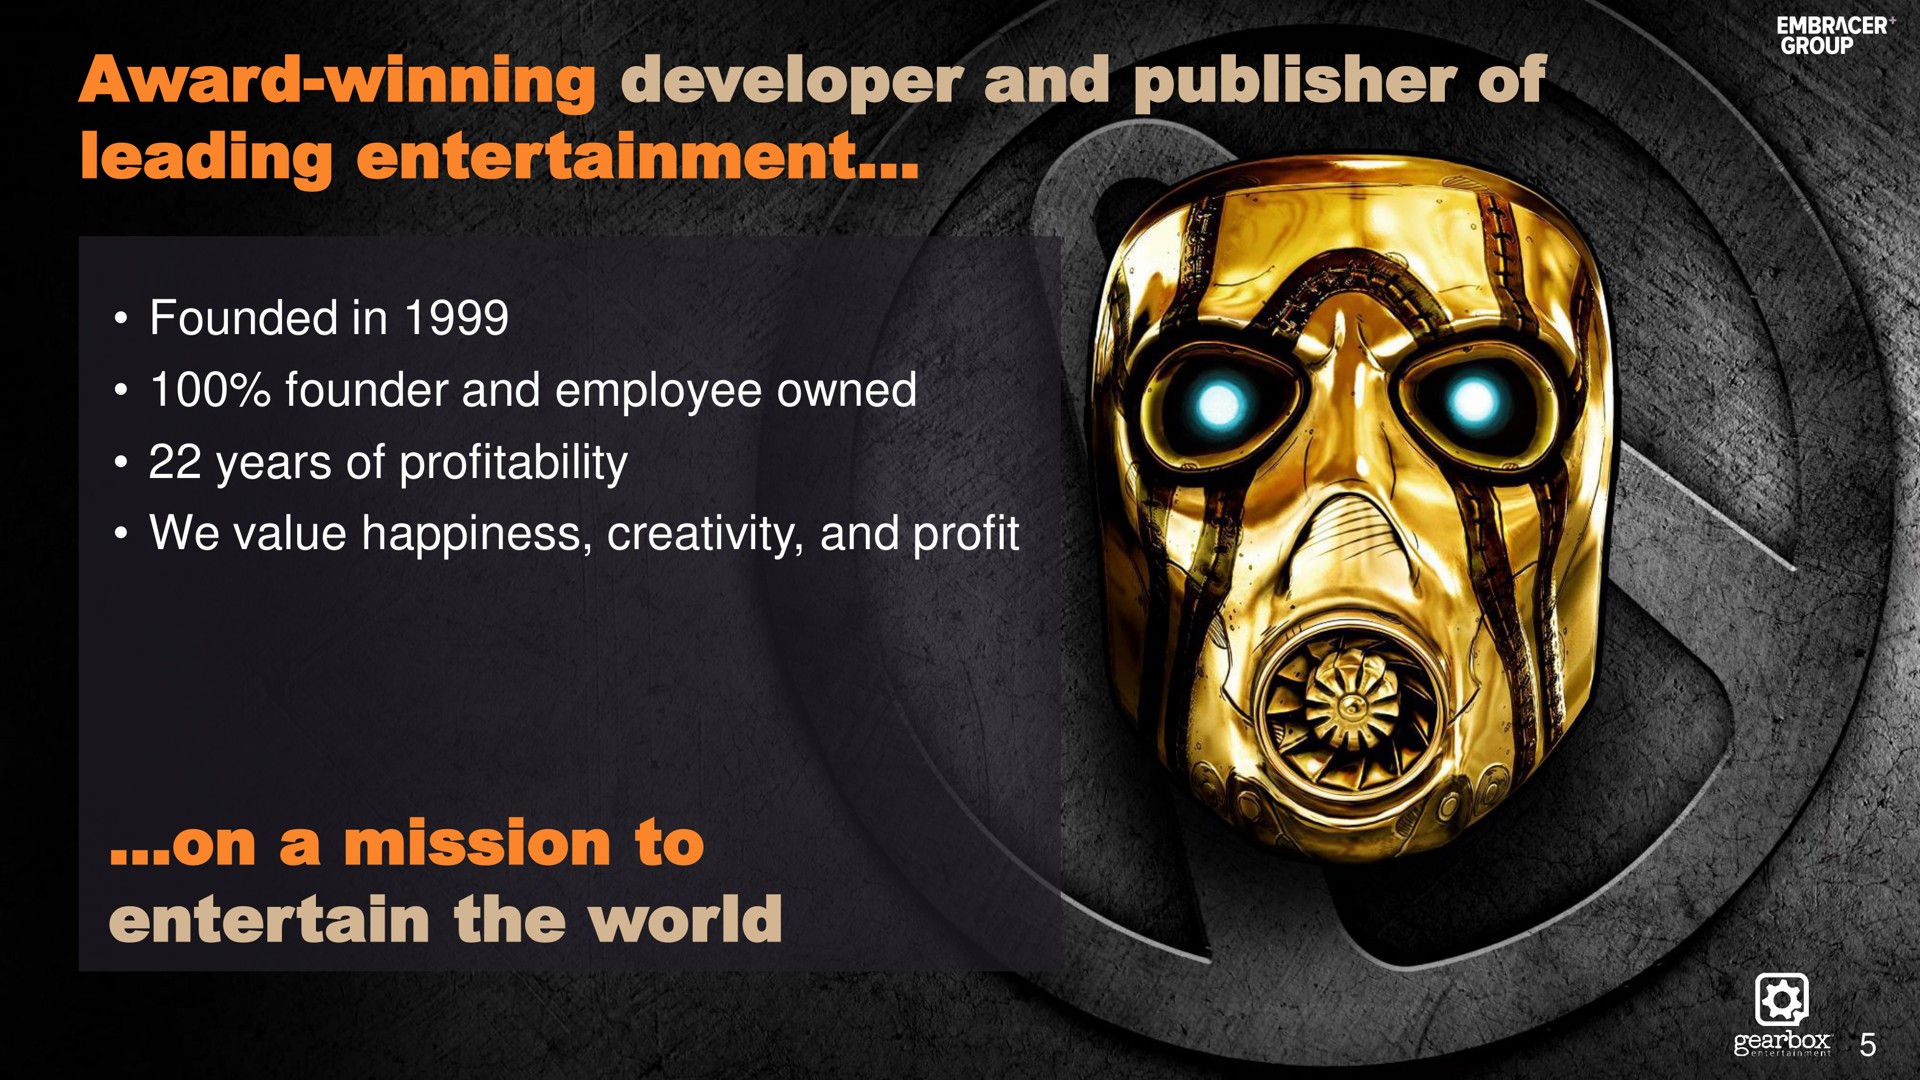 award winning developer and publisher of leading entertainment on a mission to entertain the world founded in founder employee owned years profitability we value happiness creativity profit | Embracer Group